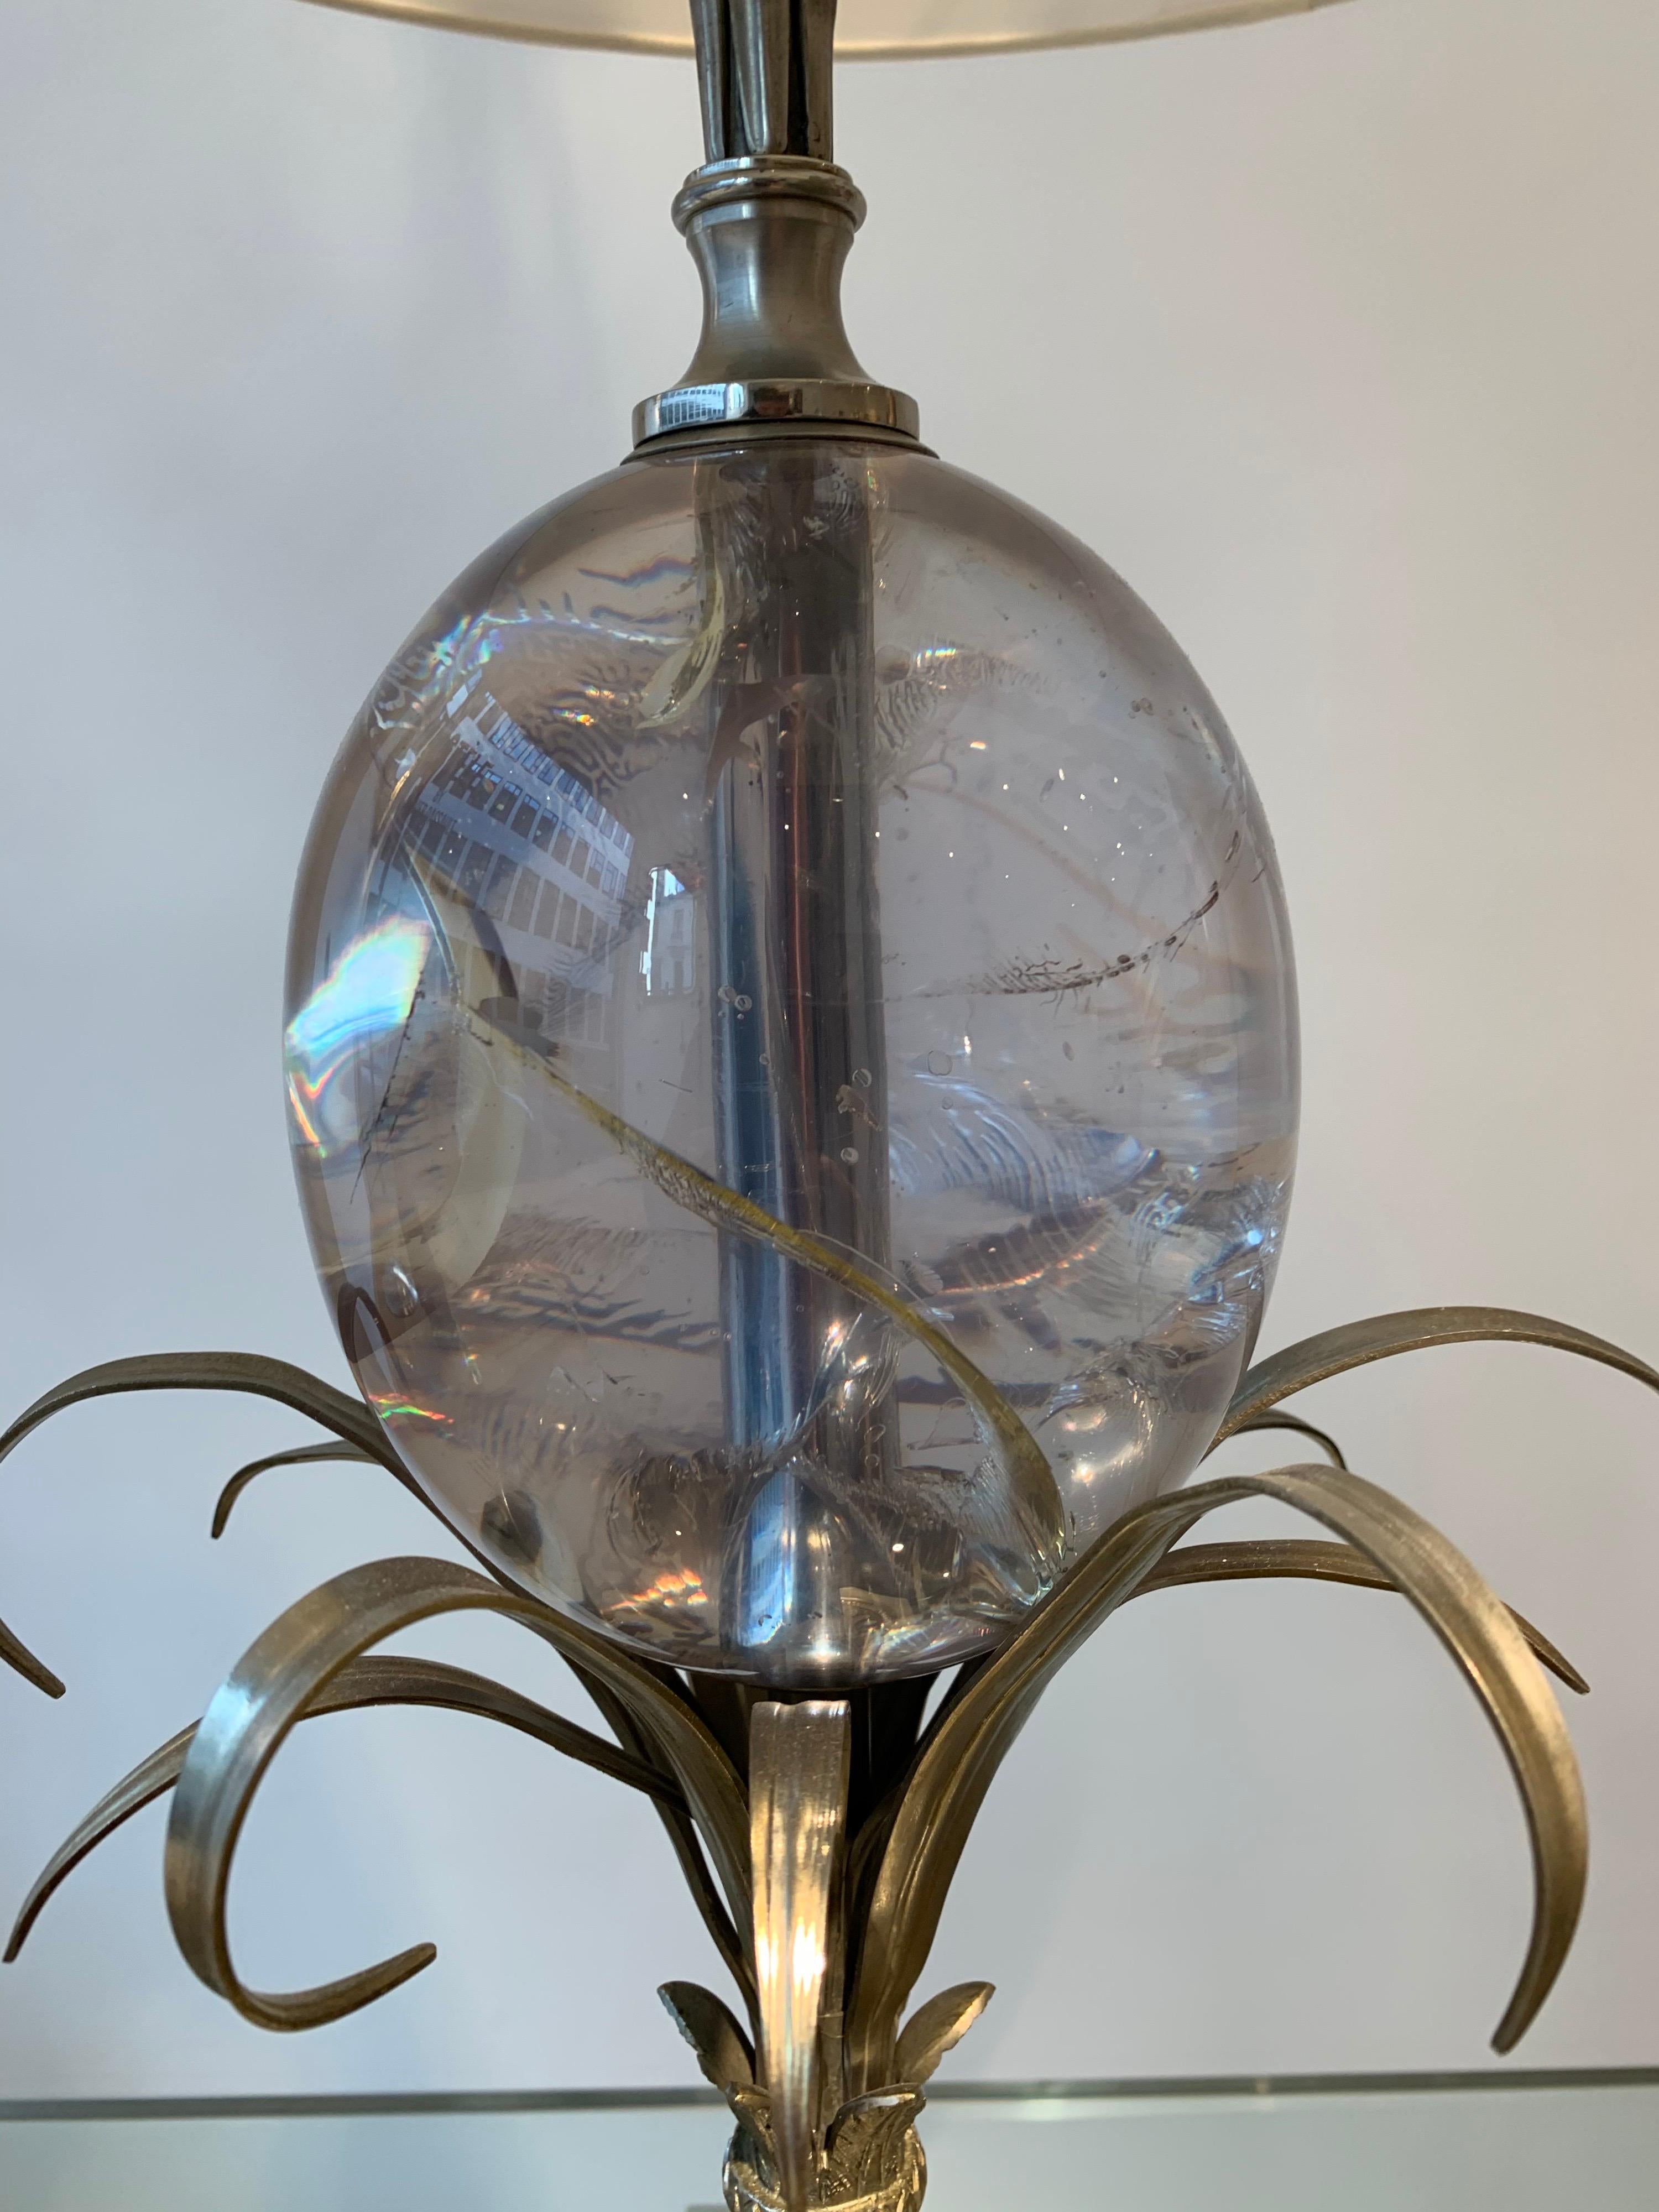 Maison Charles Silvered Bronze Lamp with Fractal Resin, circa 1960s-1970s 1